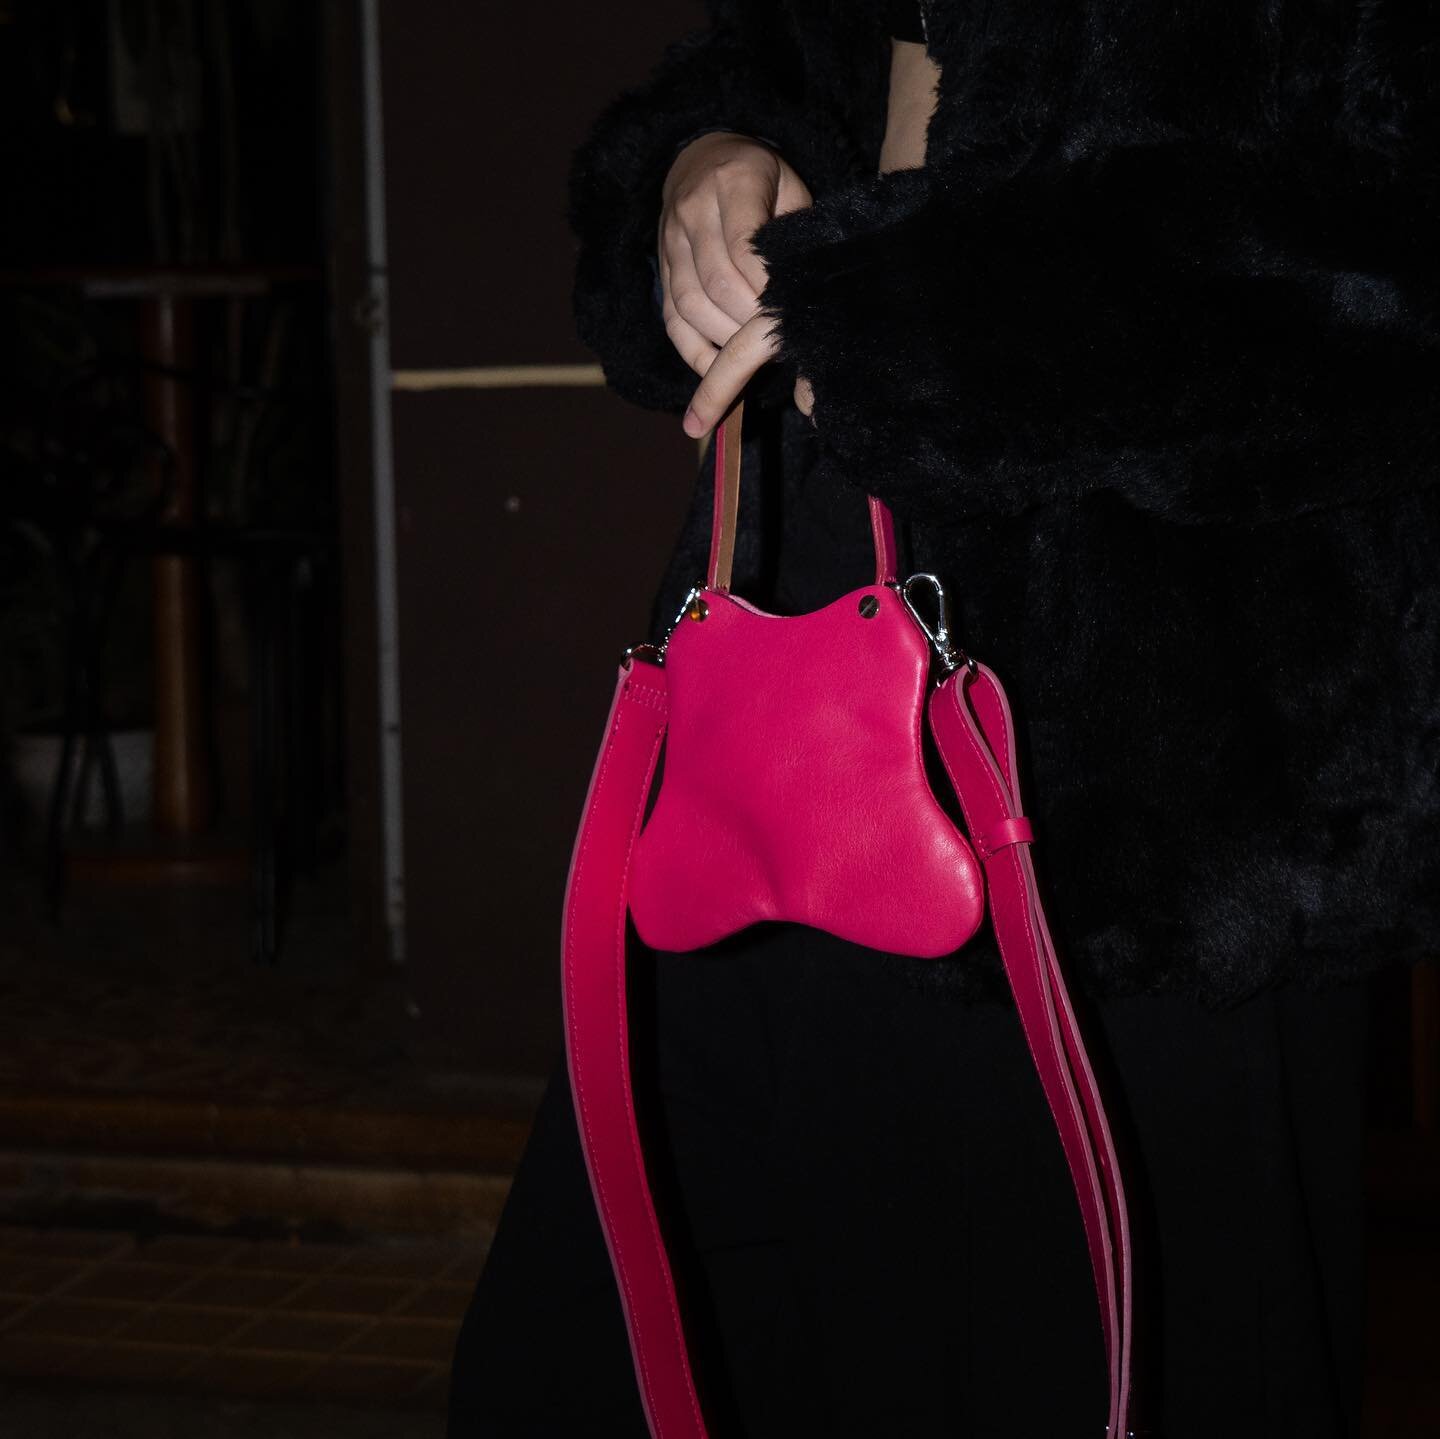 OUR MAGENTA PINK MICRO WIWO BAG FEATURING LEATHER BRAS AND CHOKER FROM 1ST CAPSULE COLLECTION

#wayinwayout
WWW.WAYINWAYOUT.CLUB